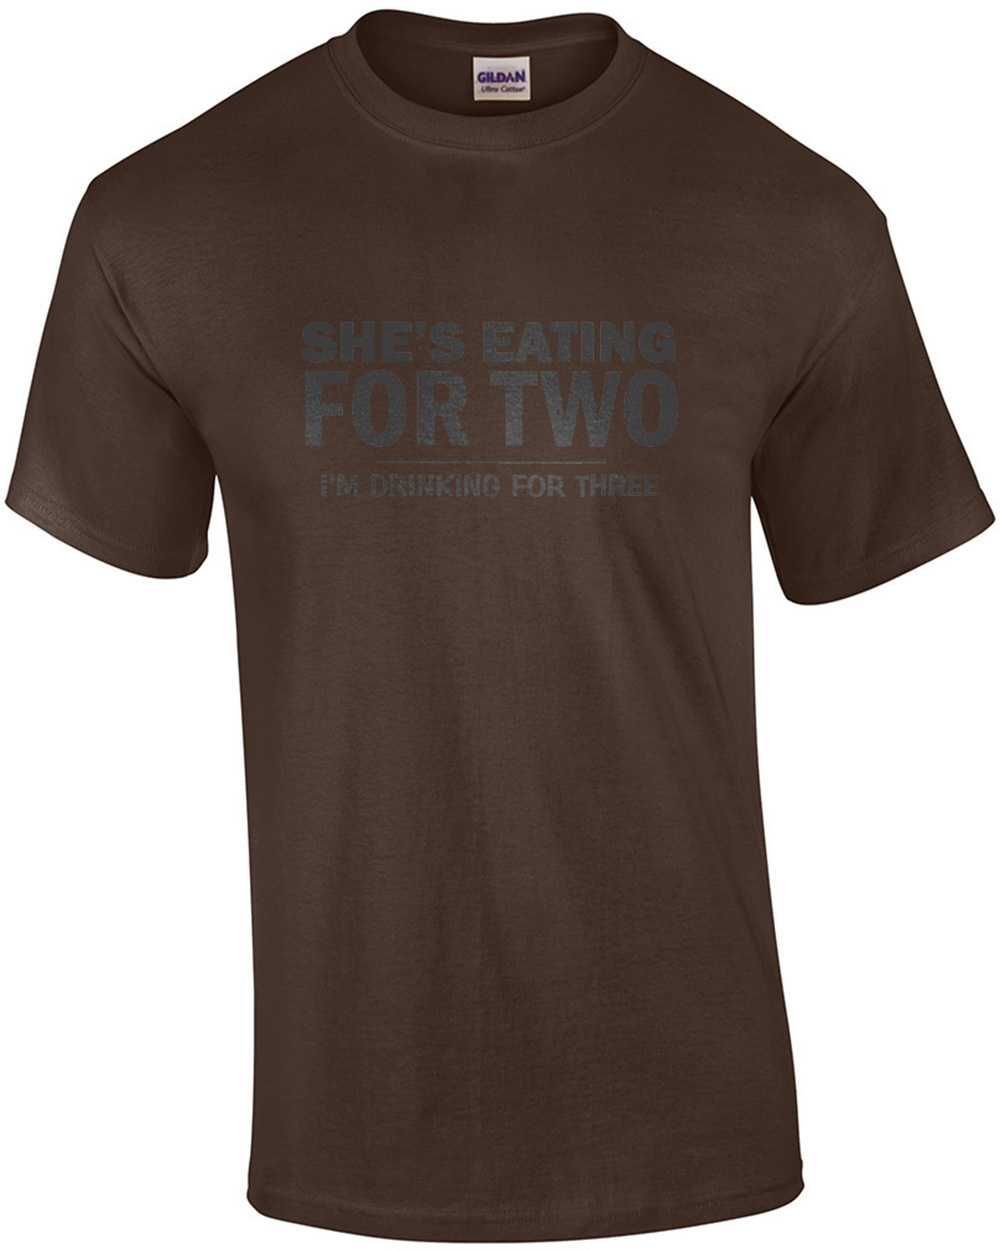 drinking/eating for Two Shirt Set Fun Pregnancy Announcement Couples Tshirts Gift Set